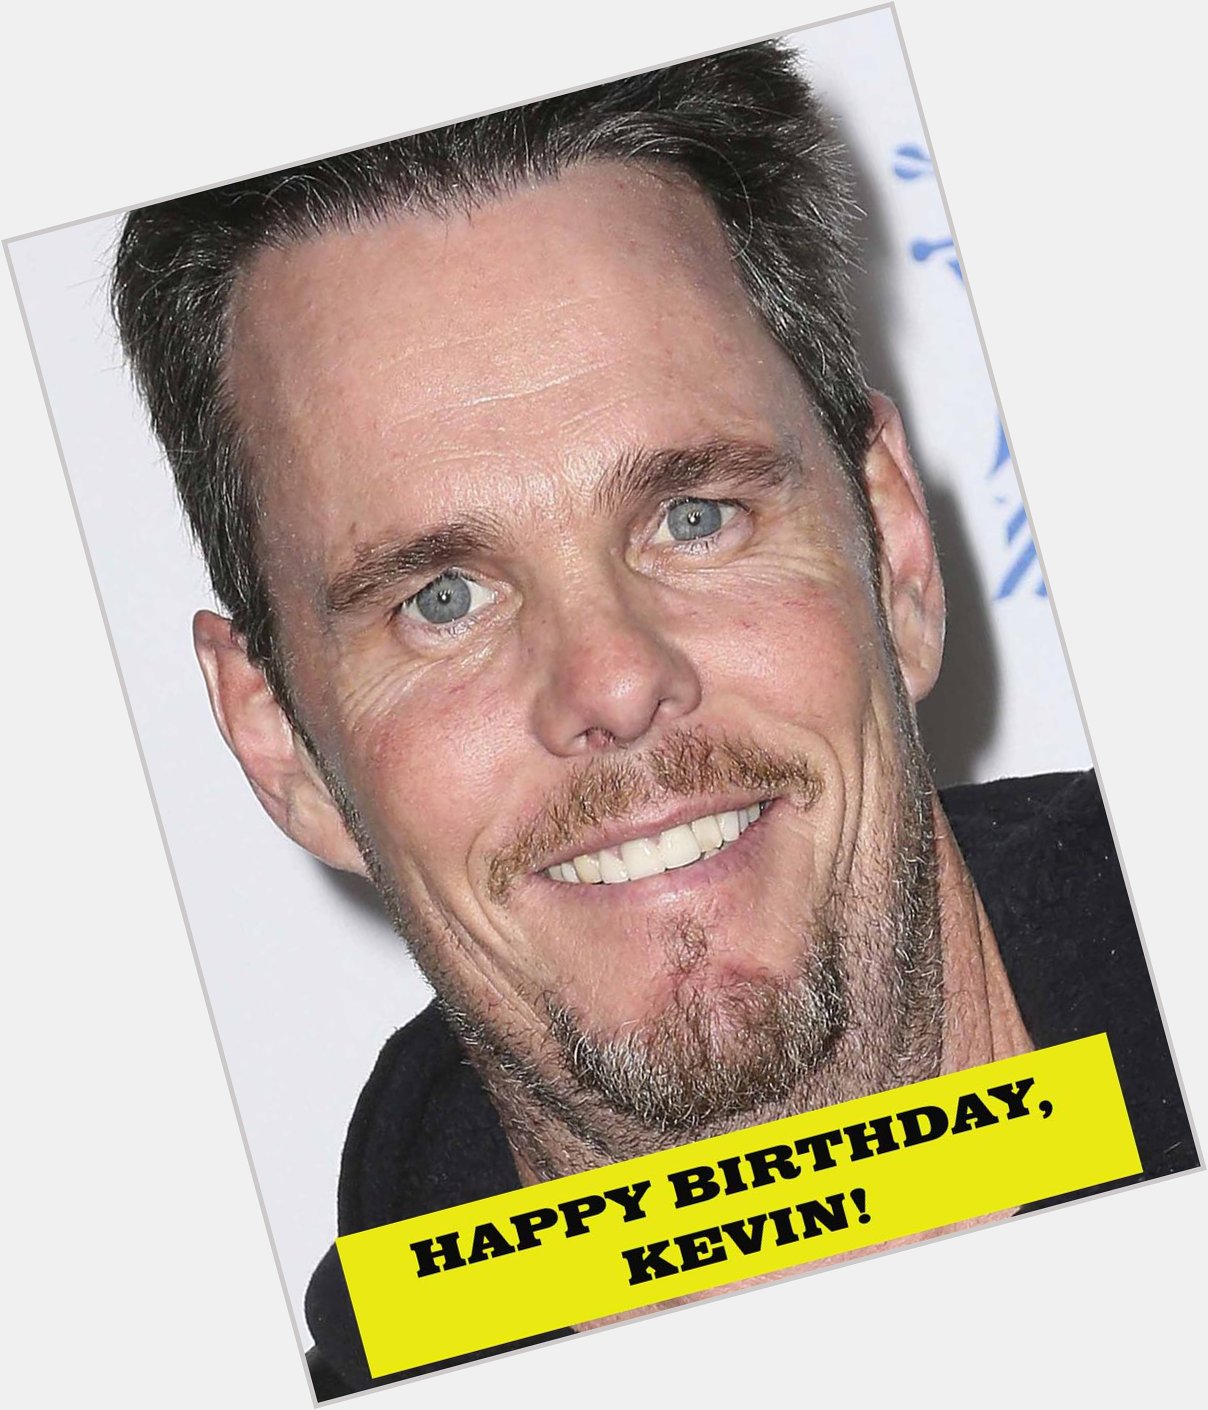 Movie Loft wishing a Happy Birthday to Kevin Dillon or for you Entourage fans, Mr. Johnny Drama. 